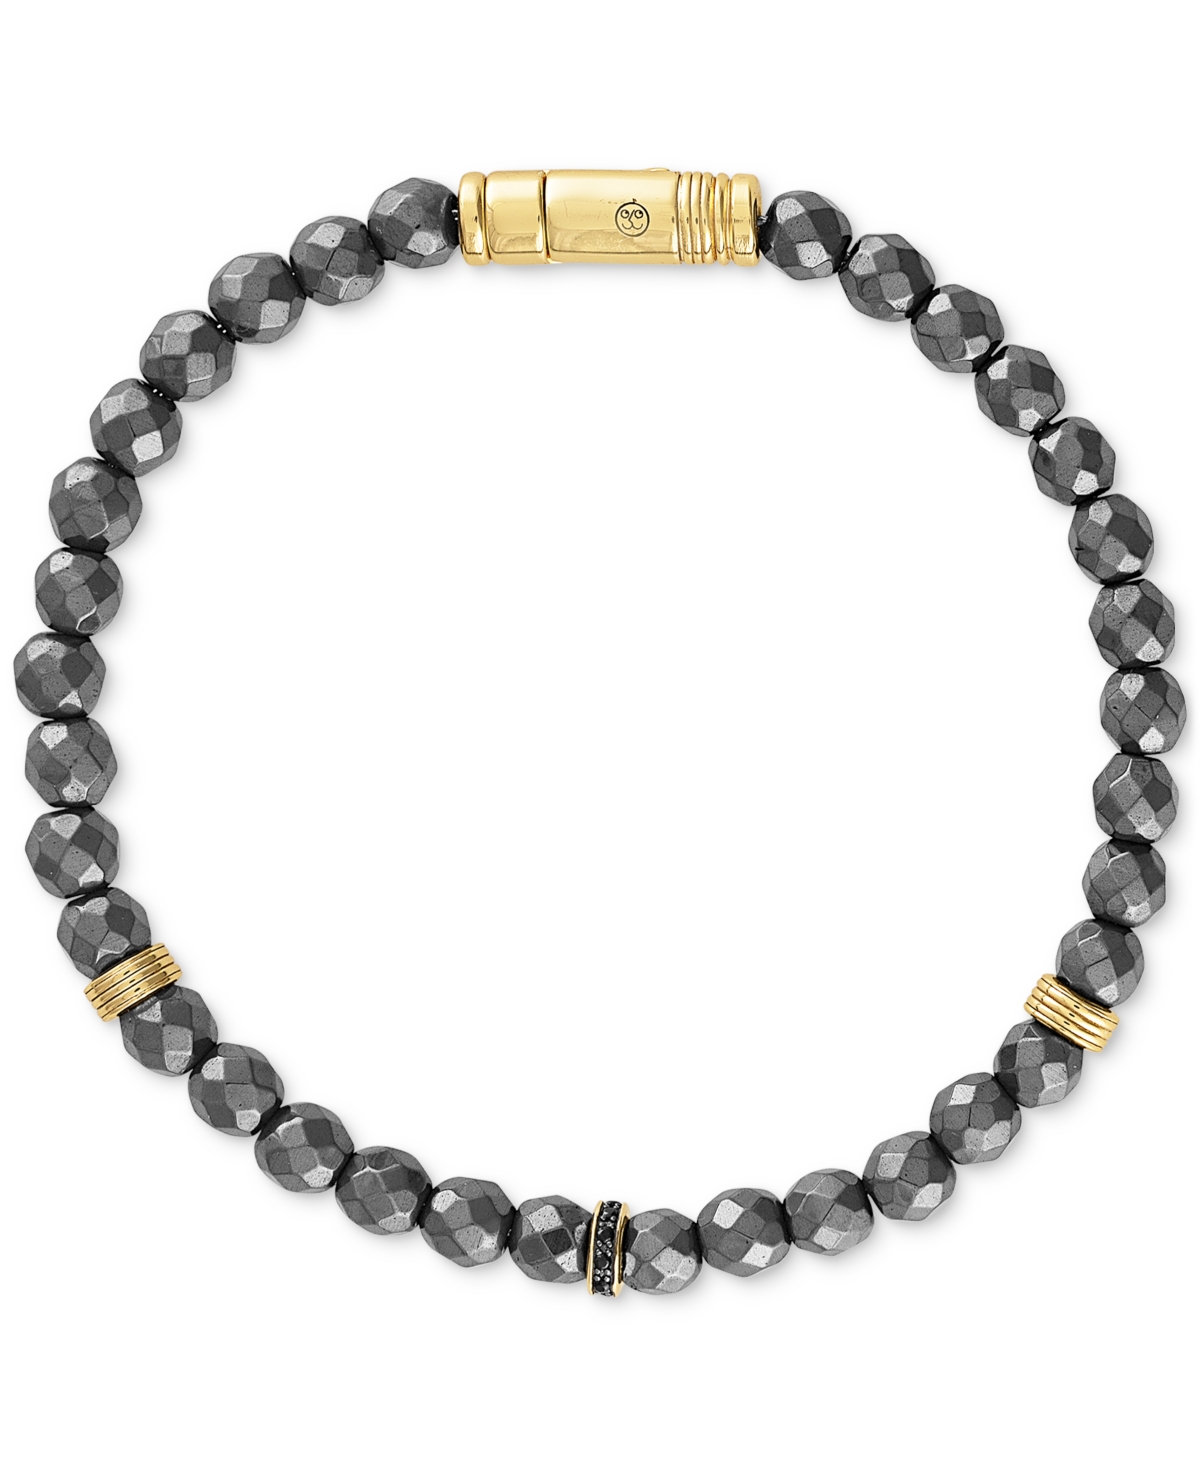 Hematite Bead & Black Diamond Bracelet (1/20 ct. t.w.) in 14k Gold-Plated Sterling Silver, Created for Macy's - Gold Over Silver